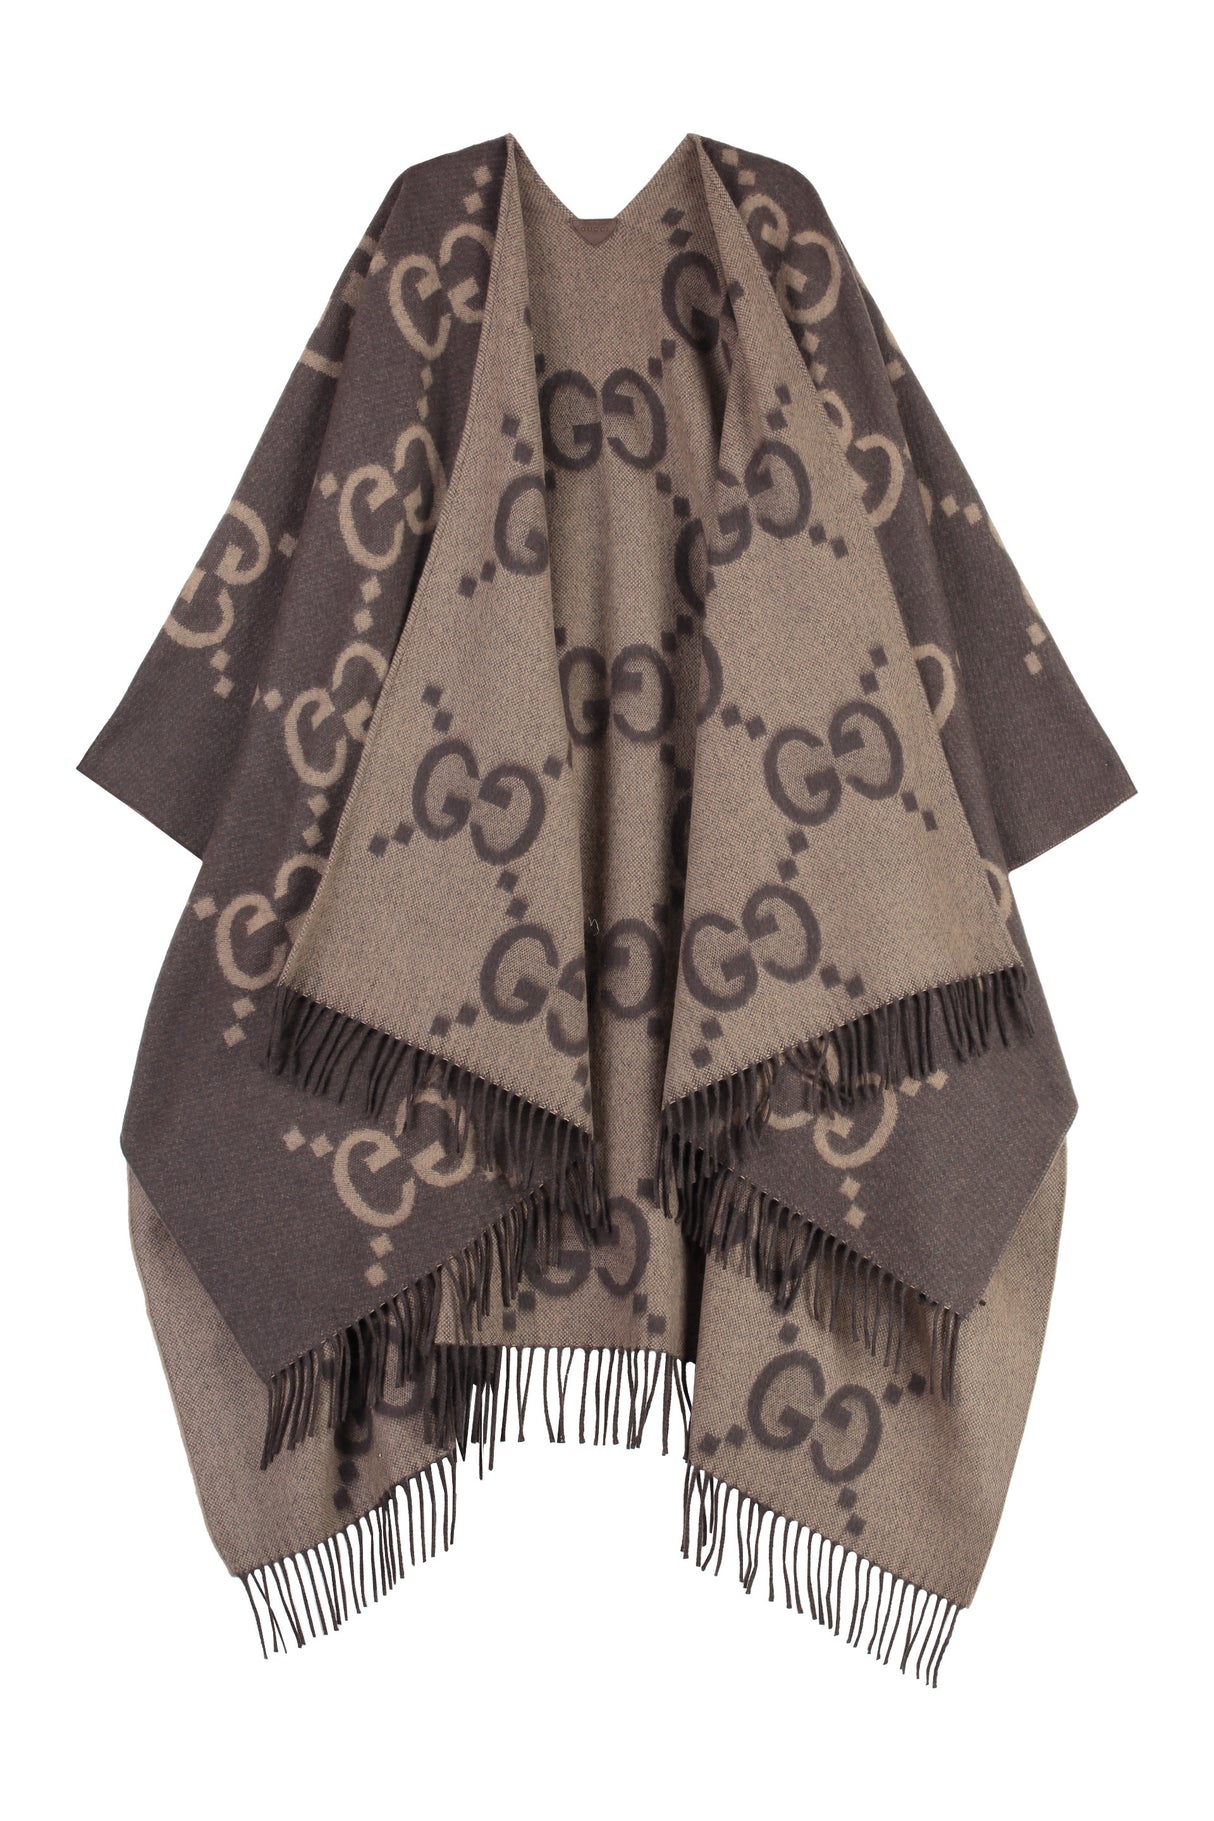 GUCCI Reversible Cashmere Poncho with Leather and Fringe Details